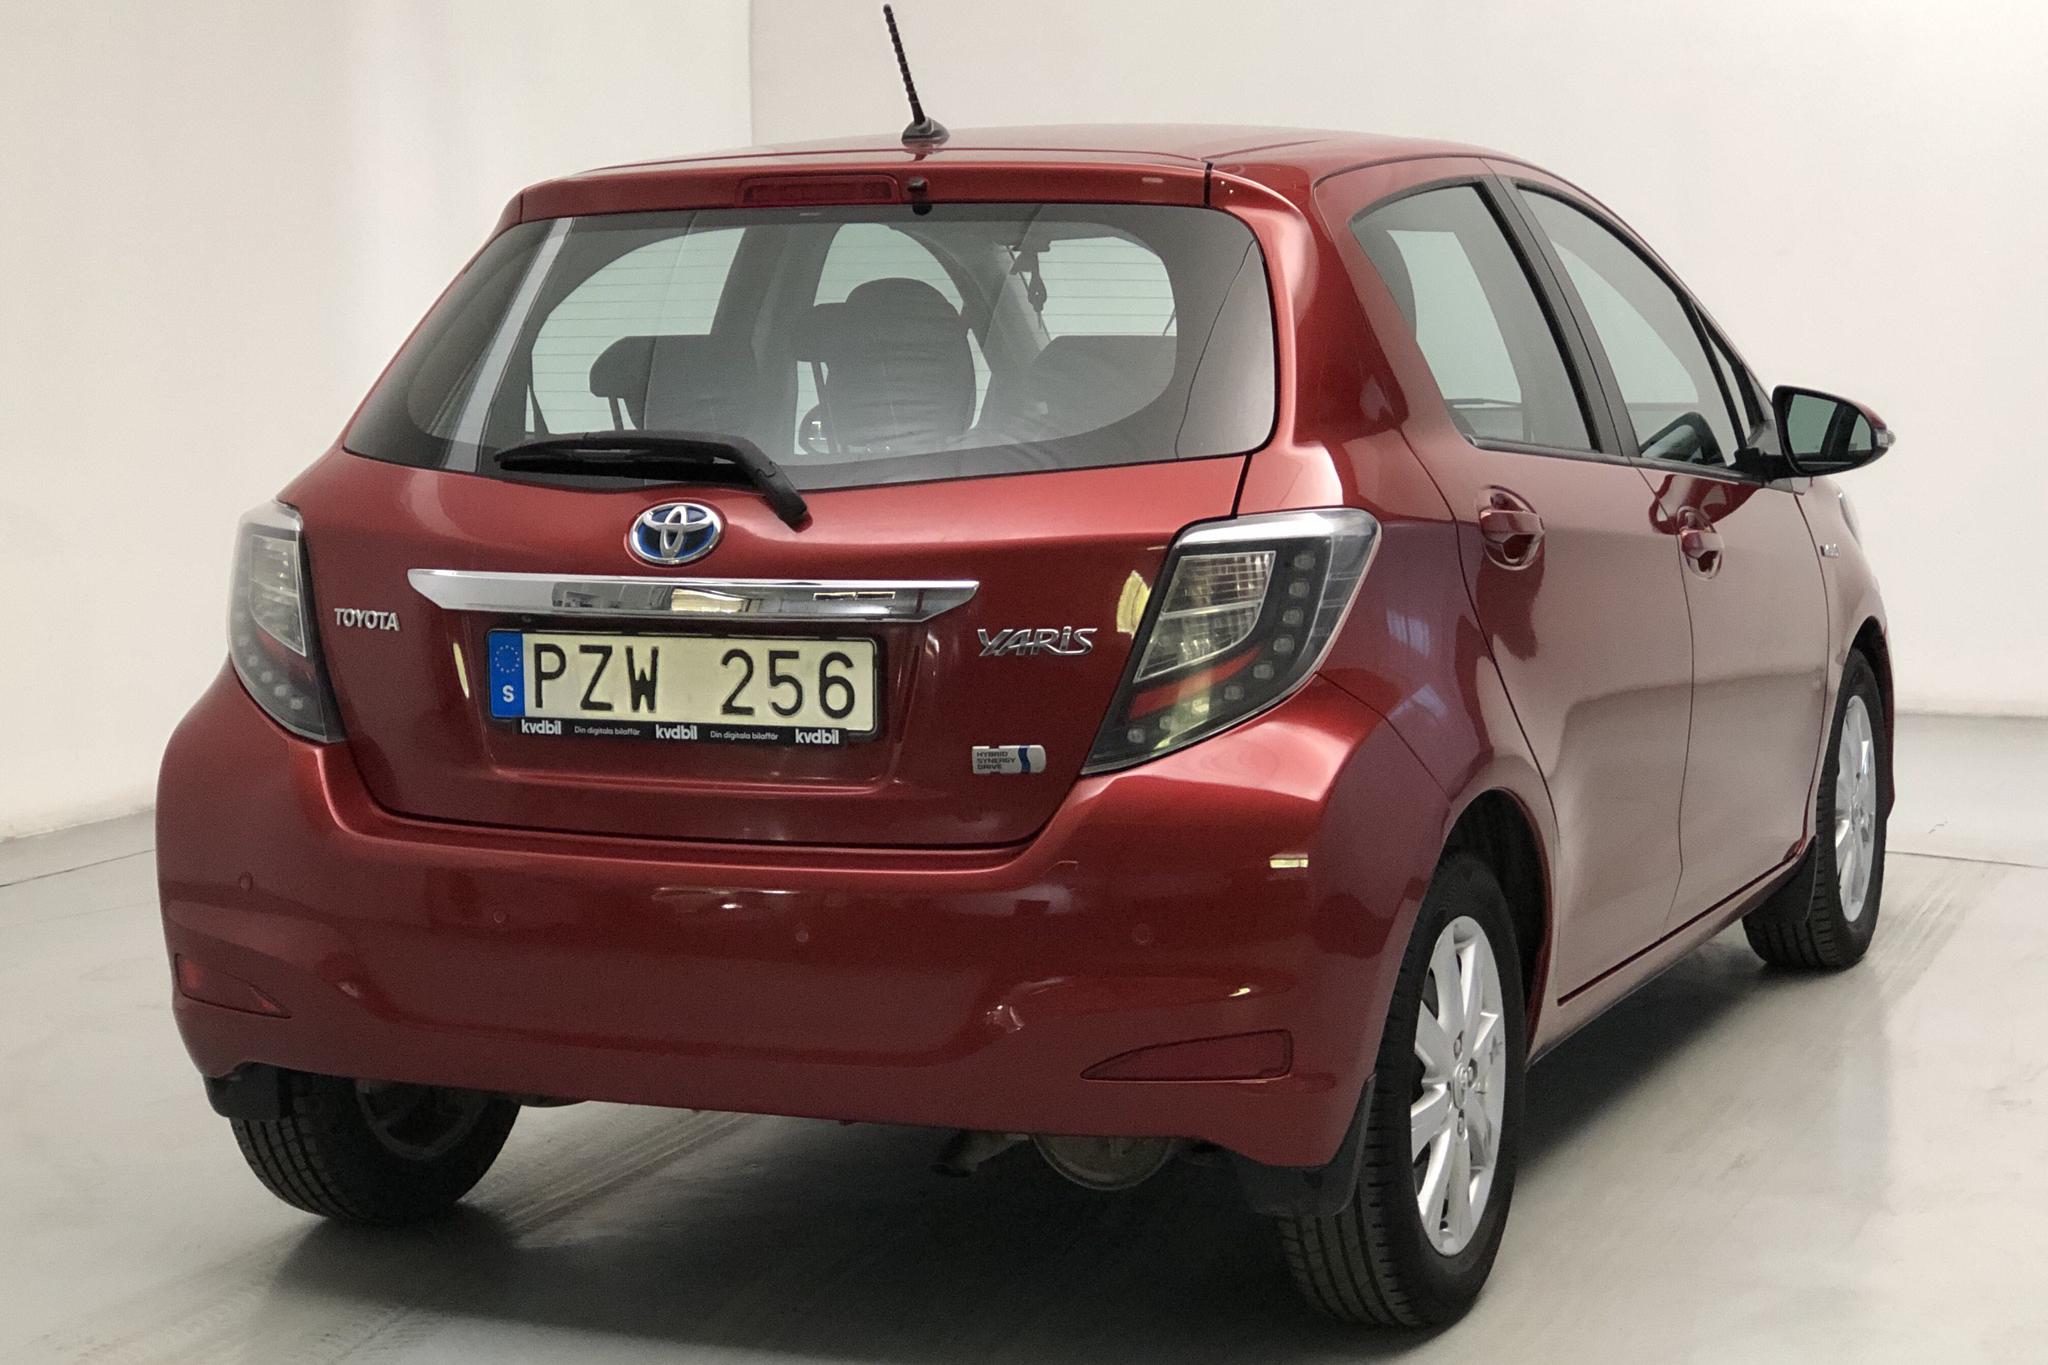 Toyota Yaris 1.5 HSD 5dr (75hk) - 148 250 km - Automatic - red - 2013